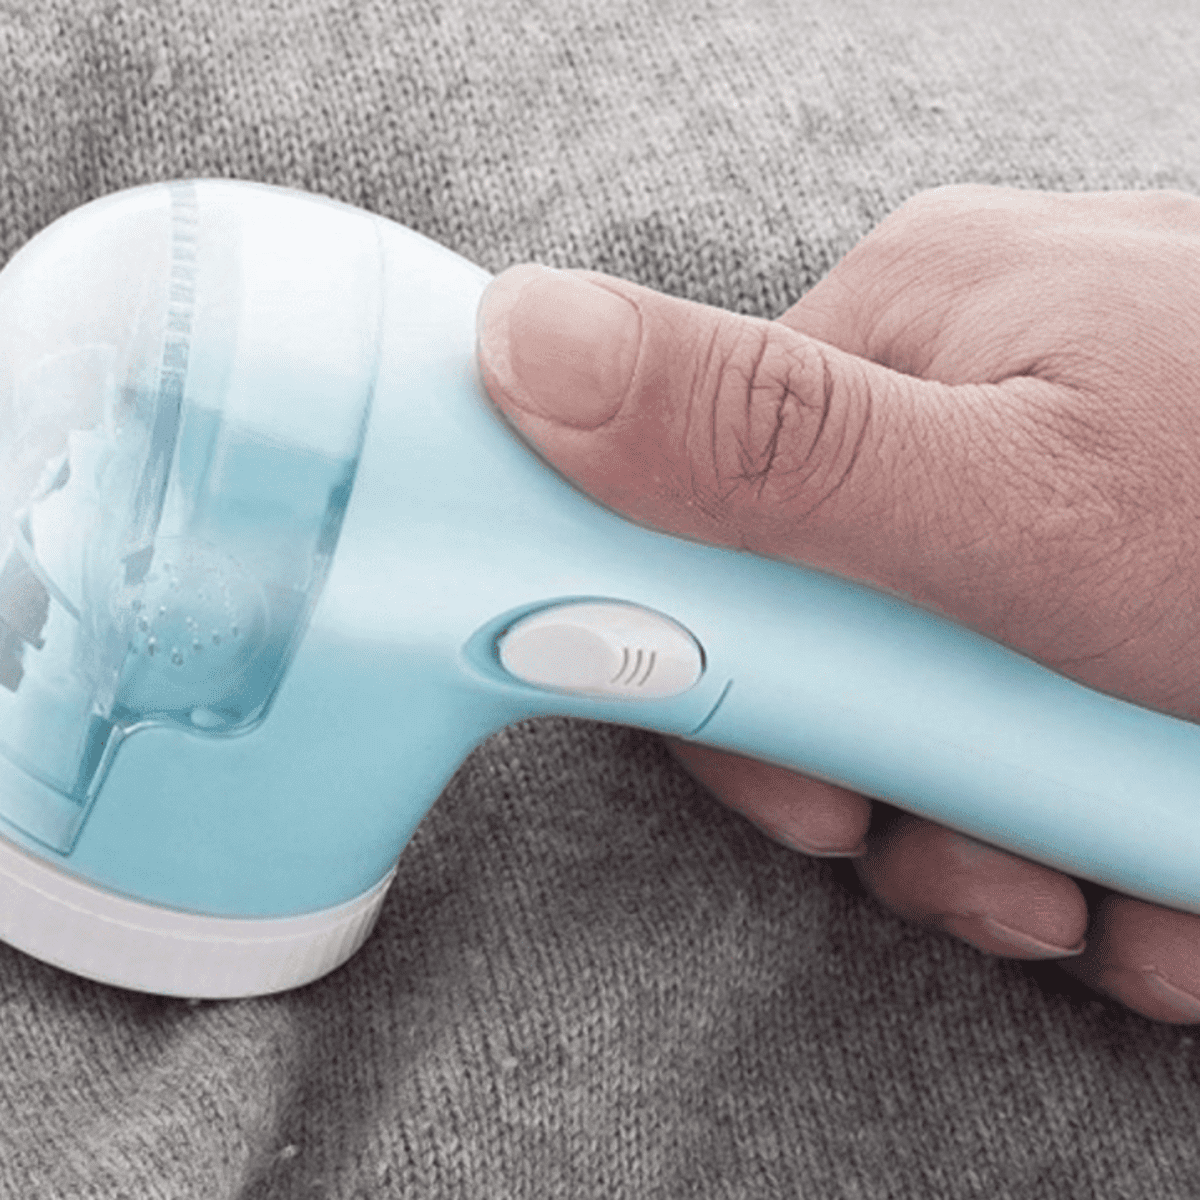 Hair-dryer to Razor, Simple Steps to Get Rid of Lint From Woolen